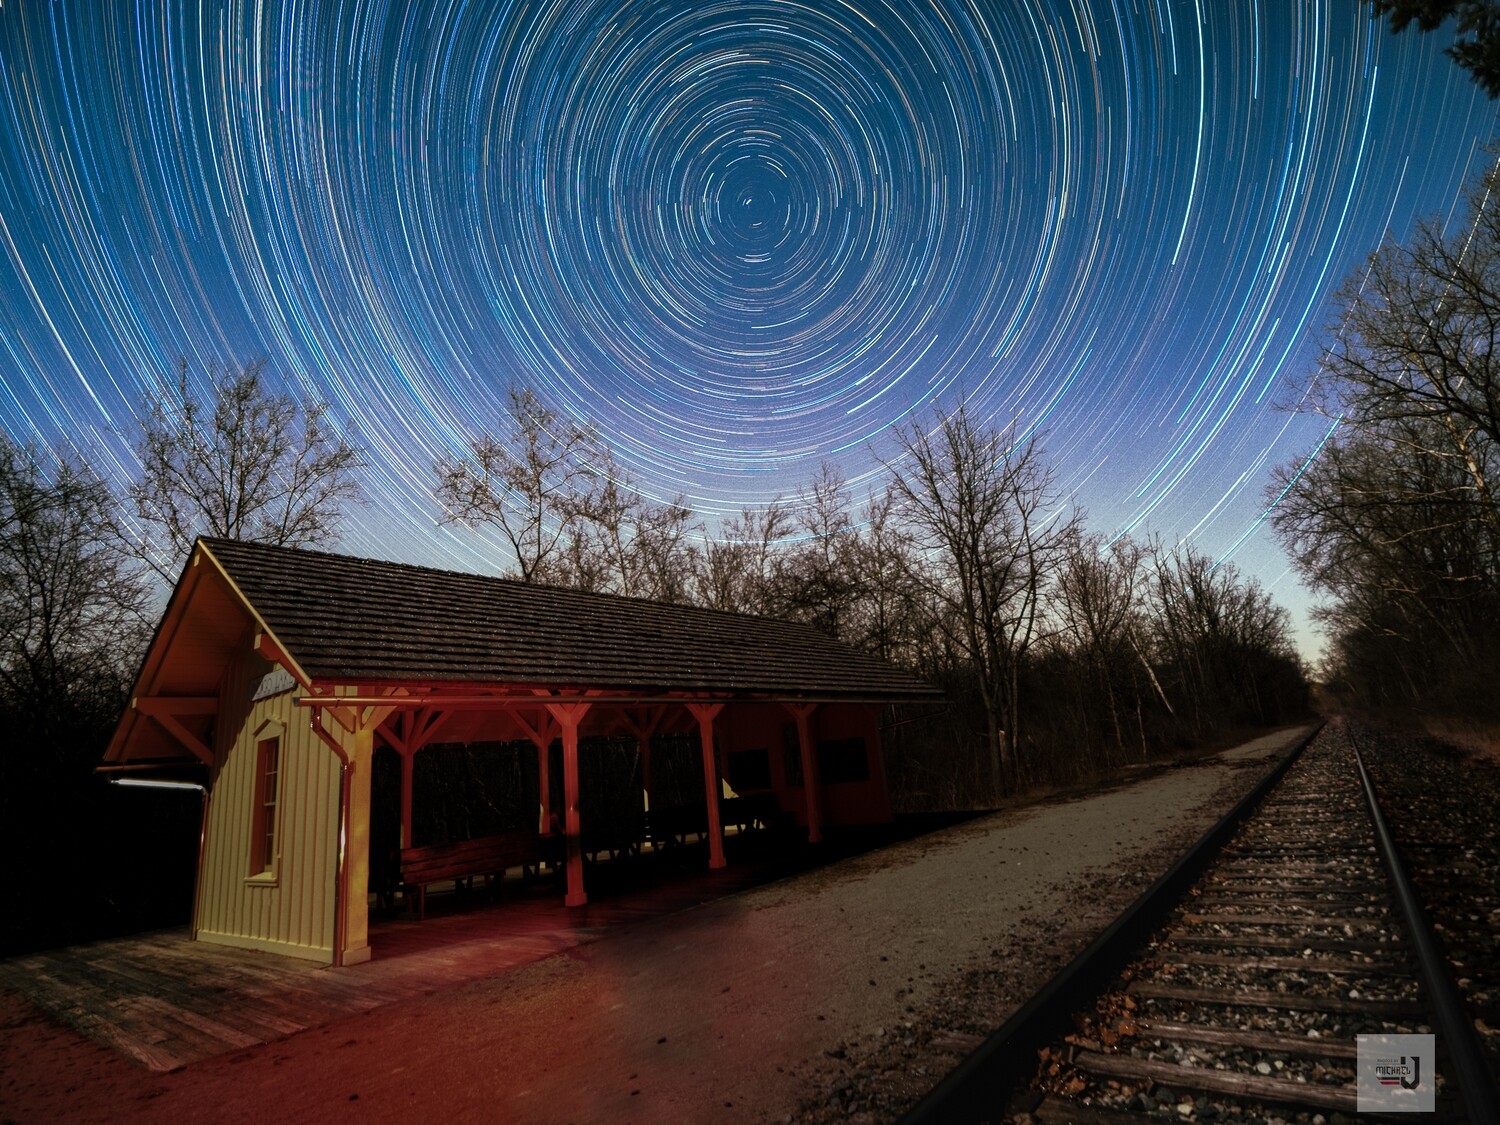 Star Trails at The Train Station